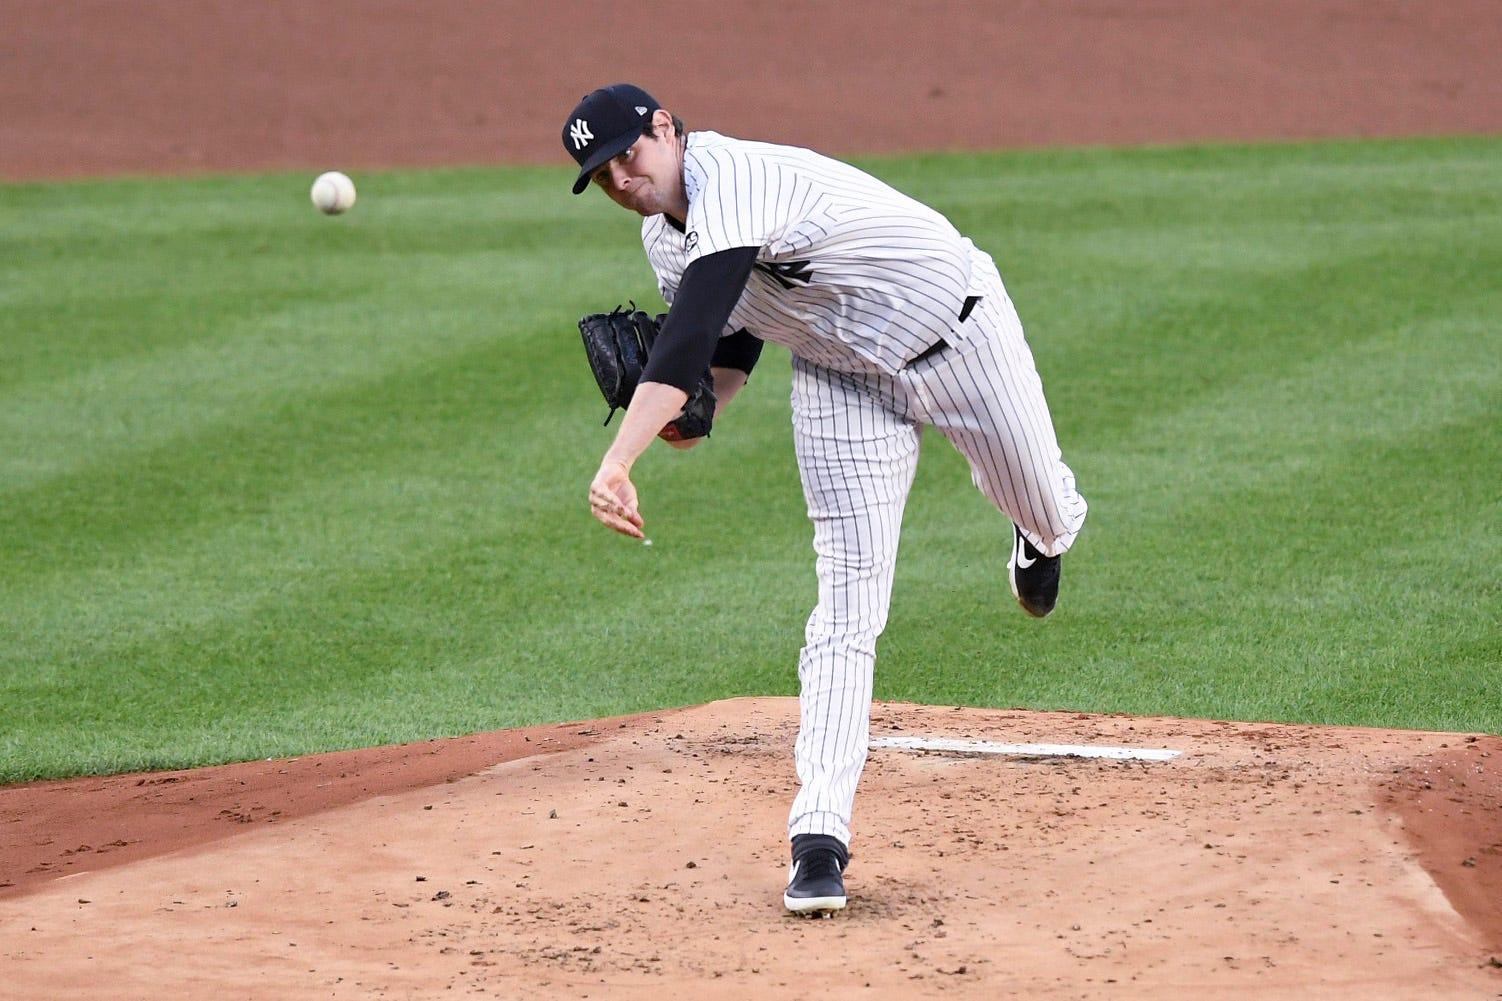 New York Yankees starting pitcher Jordan Montgomery throws to the Boston Red Sox in the Yankees' home opener at Yankee Stadium on Friday, July 31, 2020, in New York. Yanks Home Opener / © Danielle Parhizkaran/NorthJersey.com via Imagn Content Services, LLC